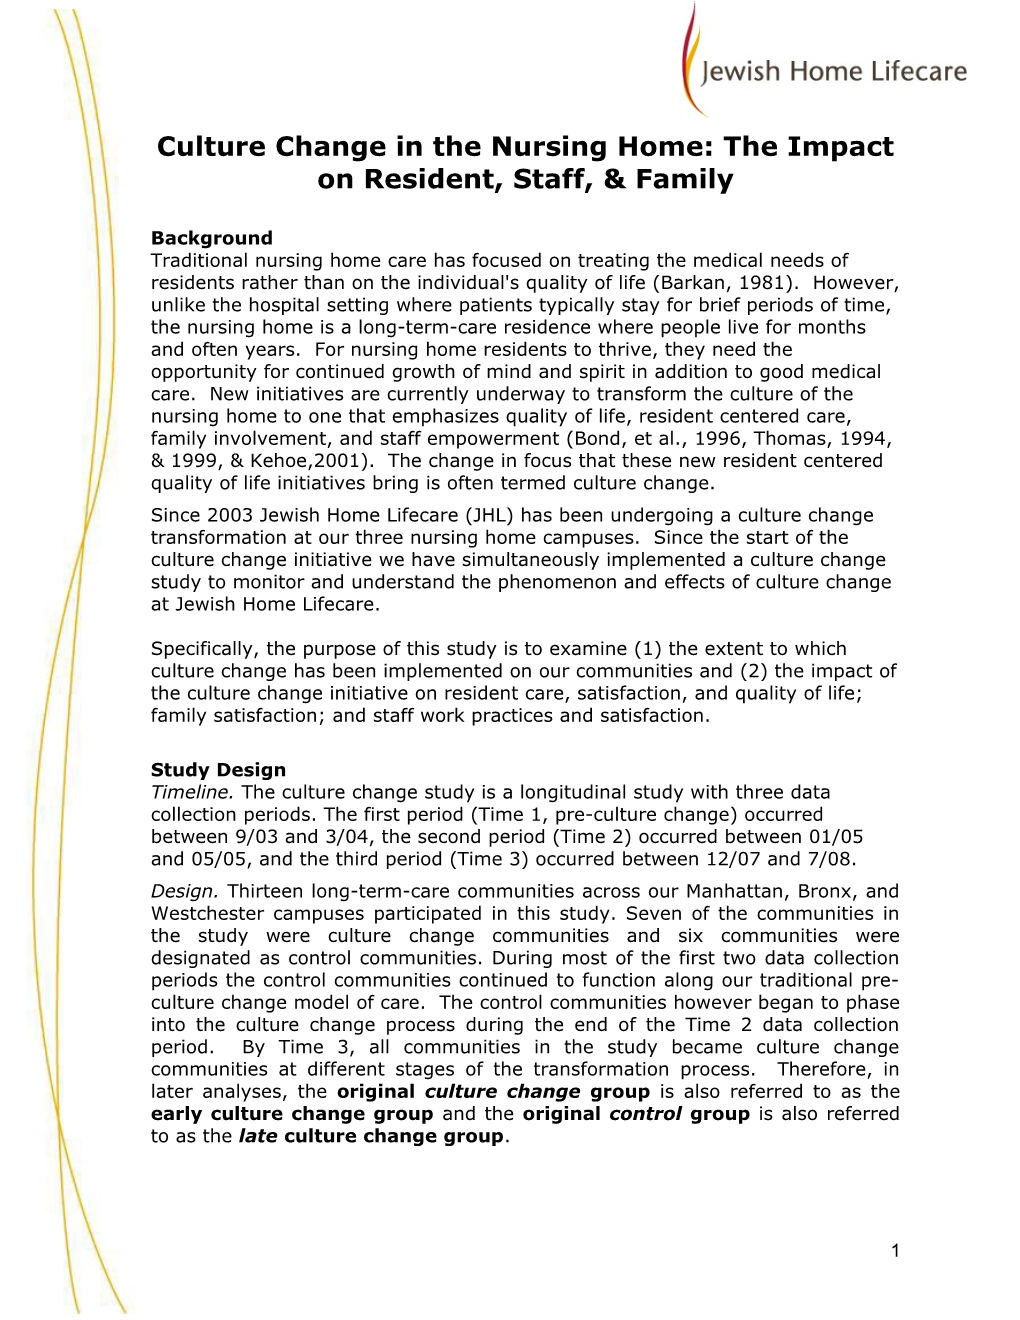 Culture Change in the Nursing Home: the Impact on Resident, Staff, & Family